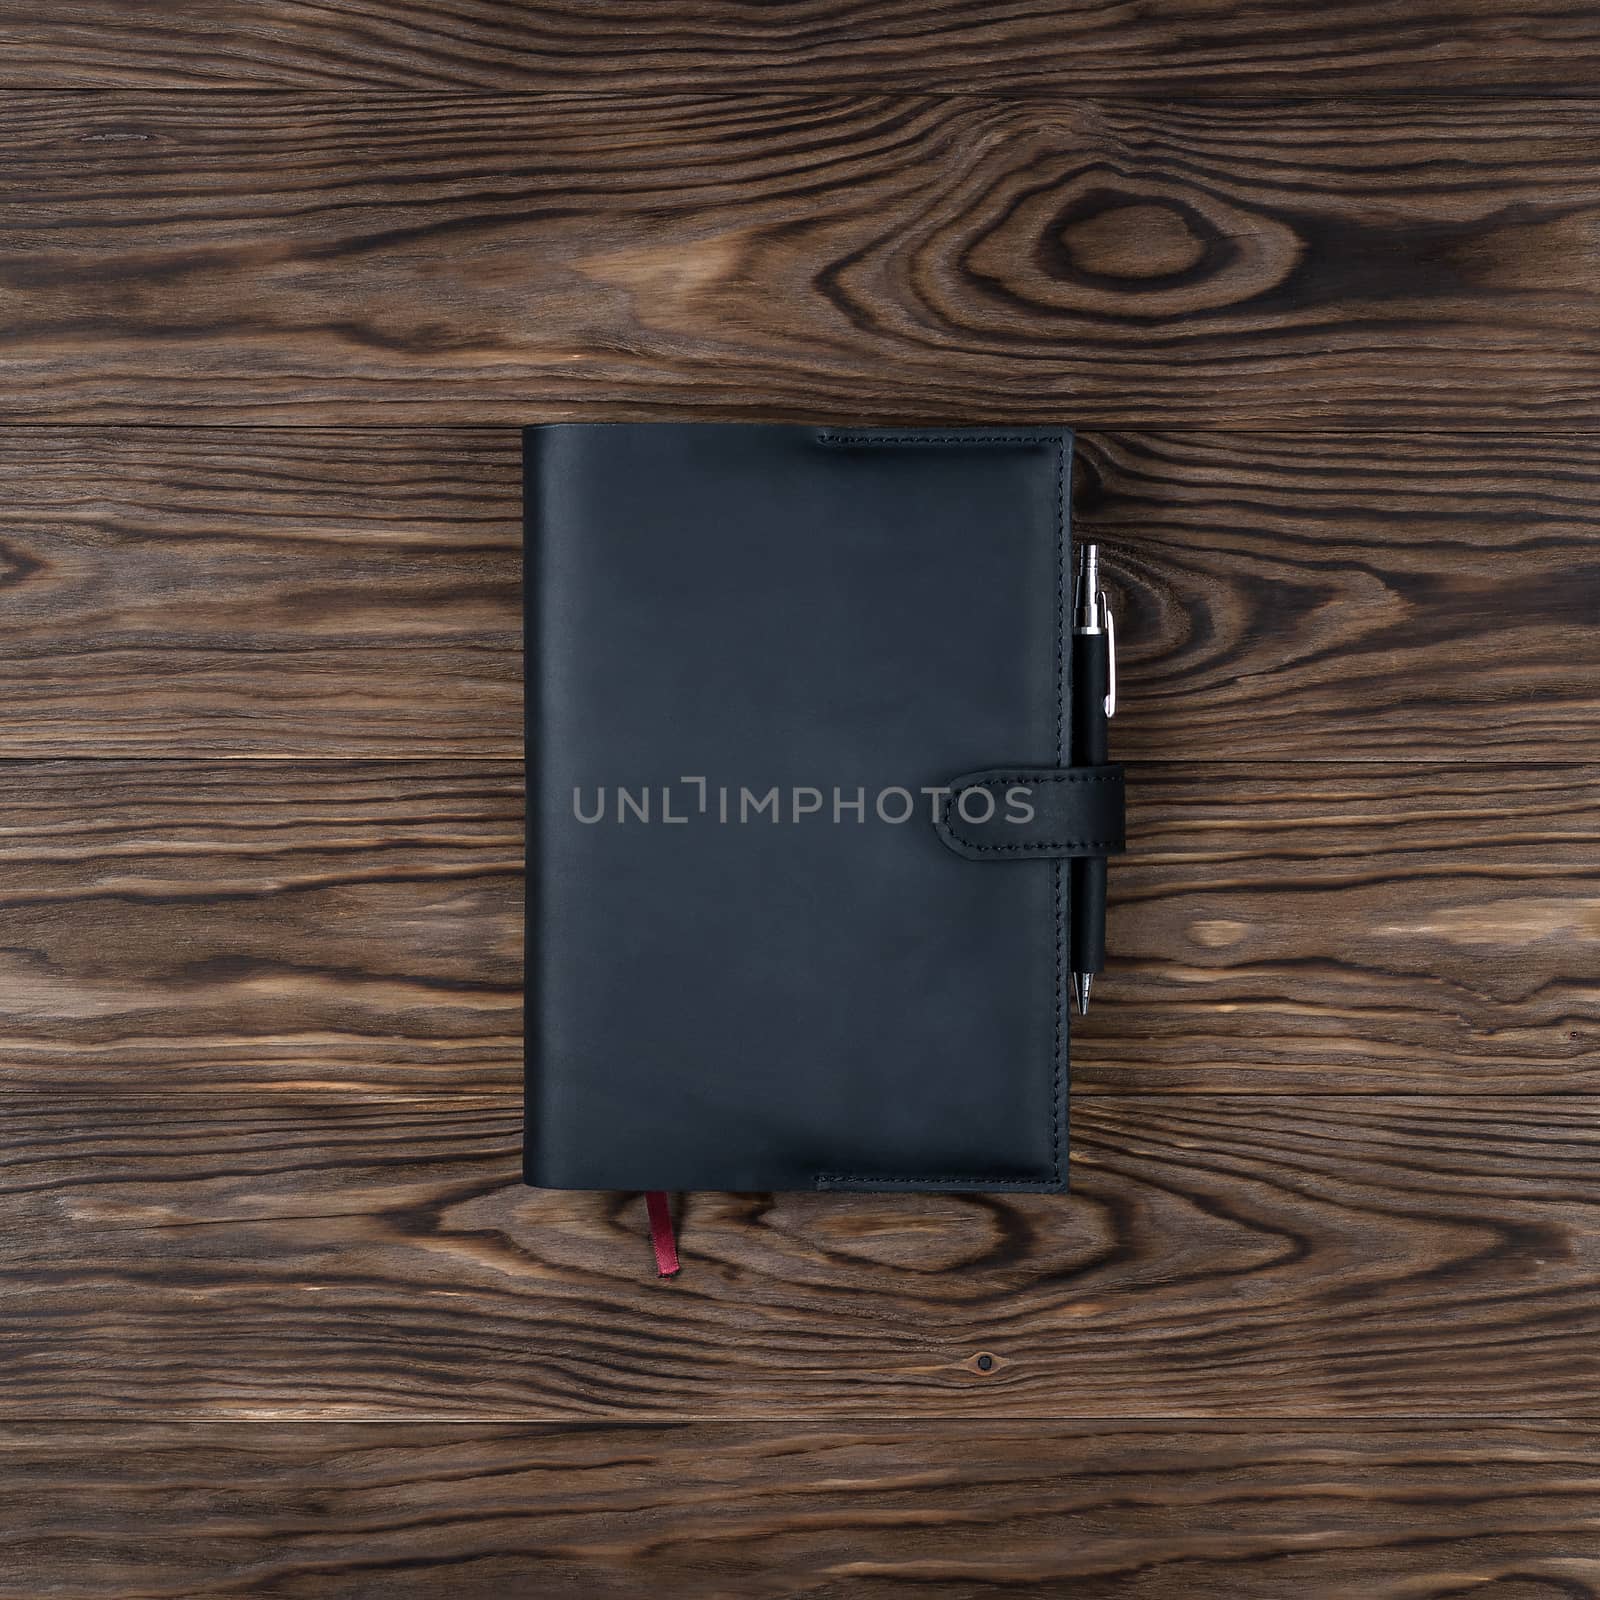 Black handmade leather notebook cover with notebook and pen on wooden background. Stock photo of luxury business accessories. Up to down view.